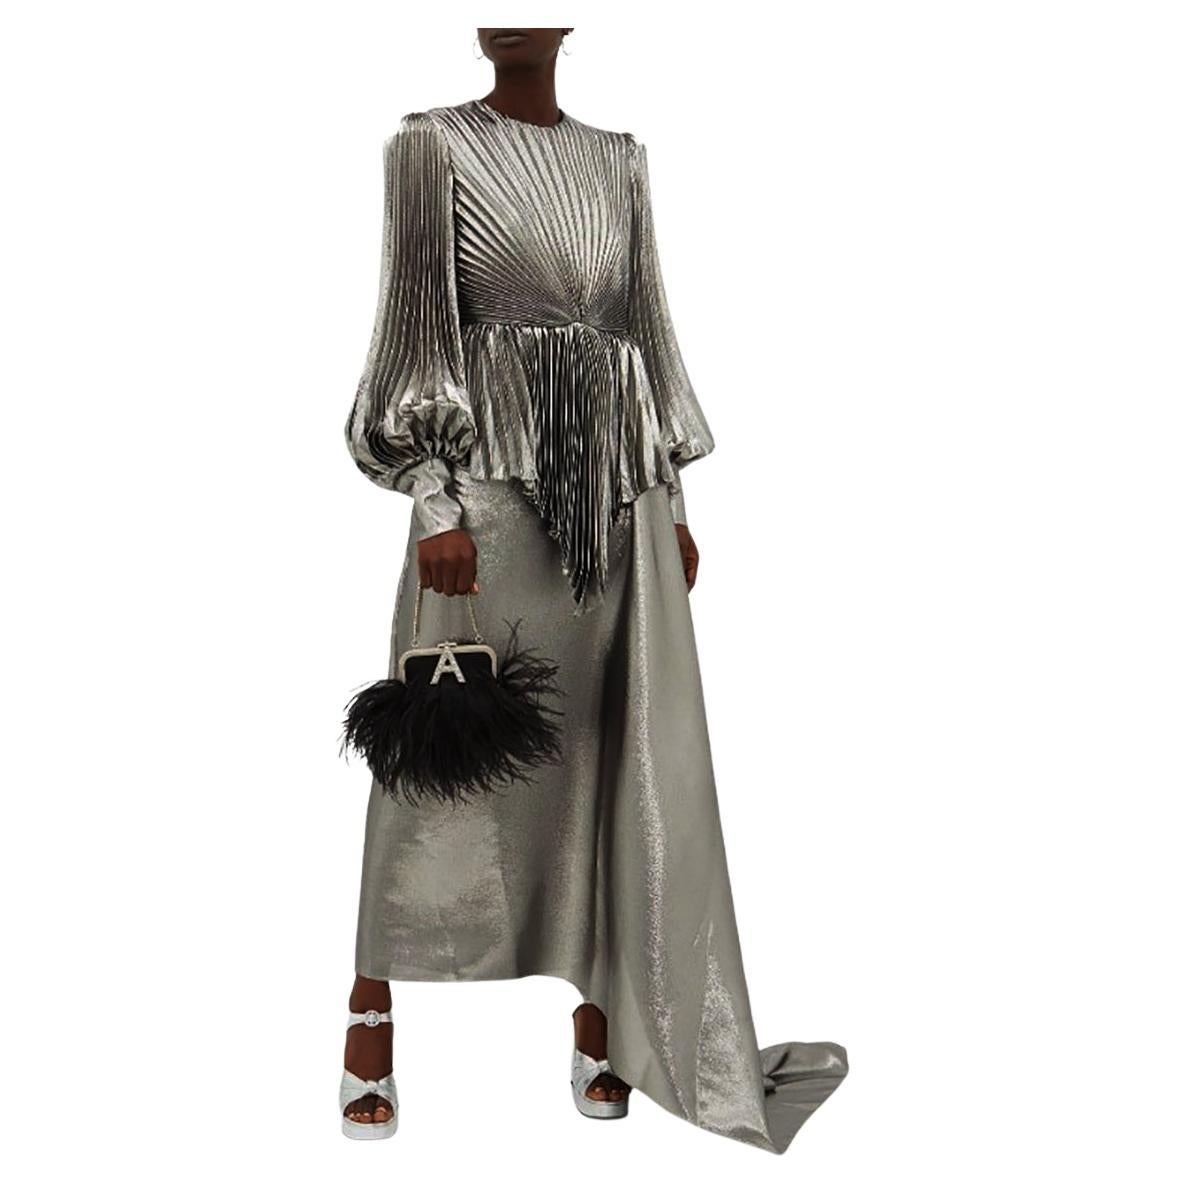 GUCCI 


Gucci Silk Evening Gown
From the 2019 Collection
Metallic & Silver
Pleated Accents
Long Sleeve with Crew Neck
Concealed Zip Closure at Back


Content: 60% Silk, 40% Polyester; Combo 73% Acetate, 27% Silk

Bust: 34.75